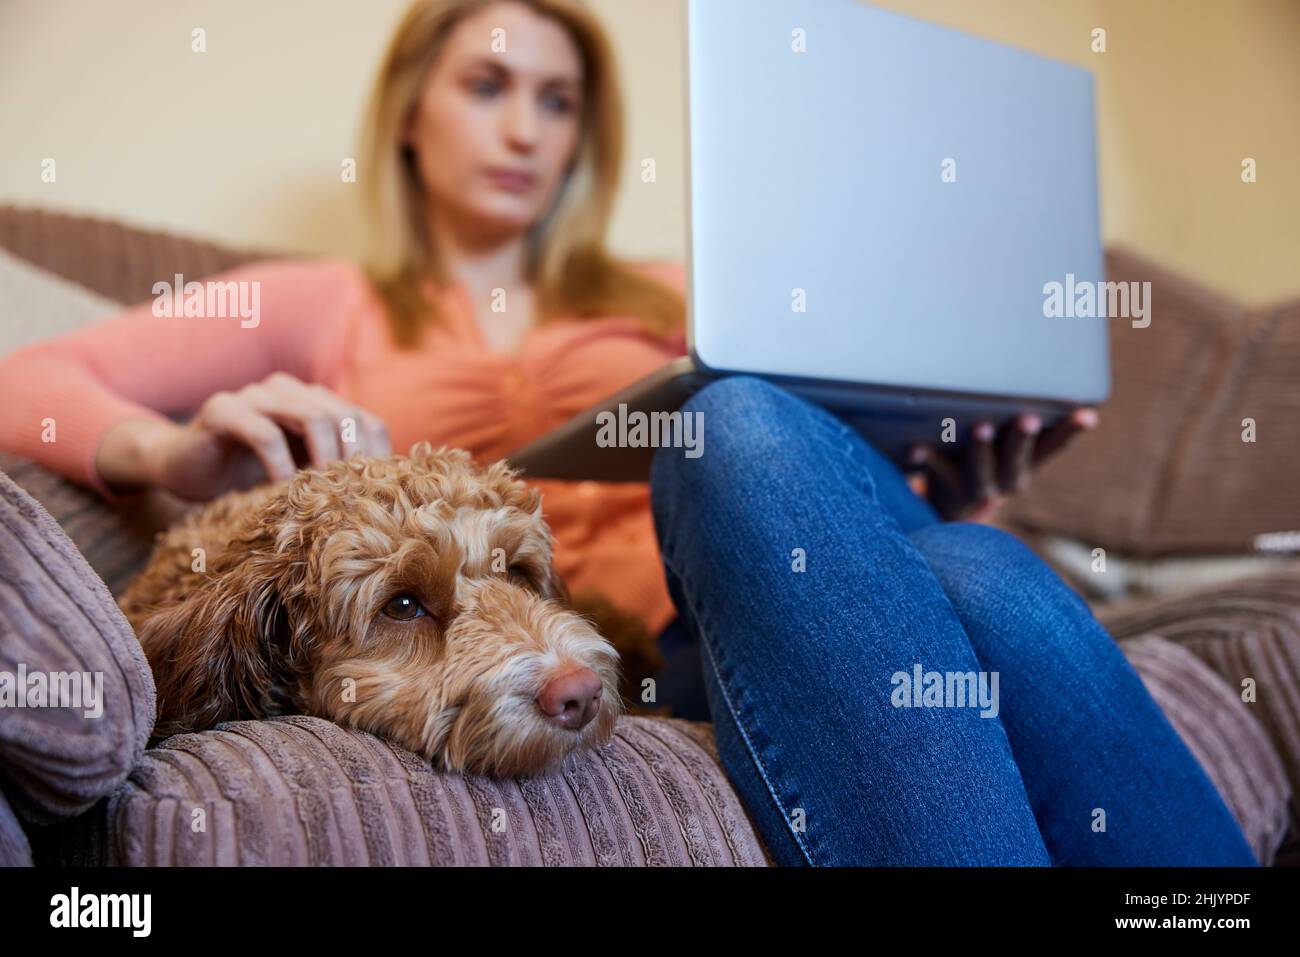 Woman With Pet Cockapoo Dog Relaxing On Sofa With Laptop At Home Stock Photo